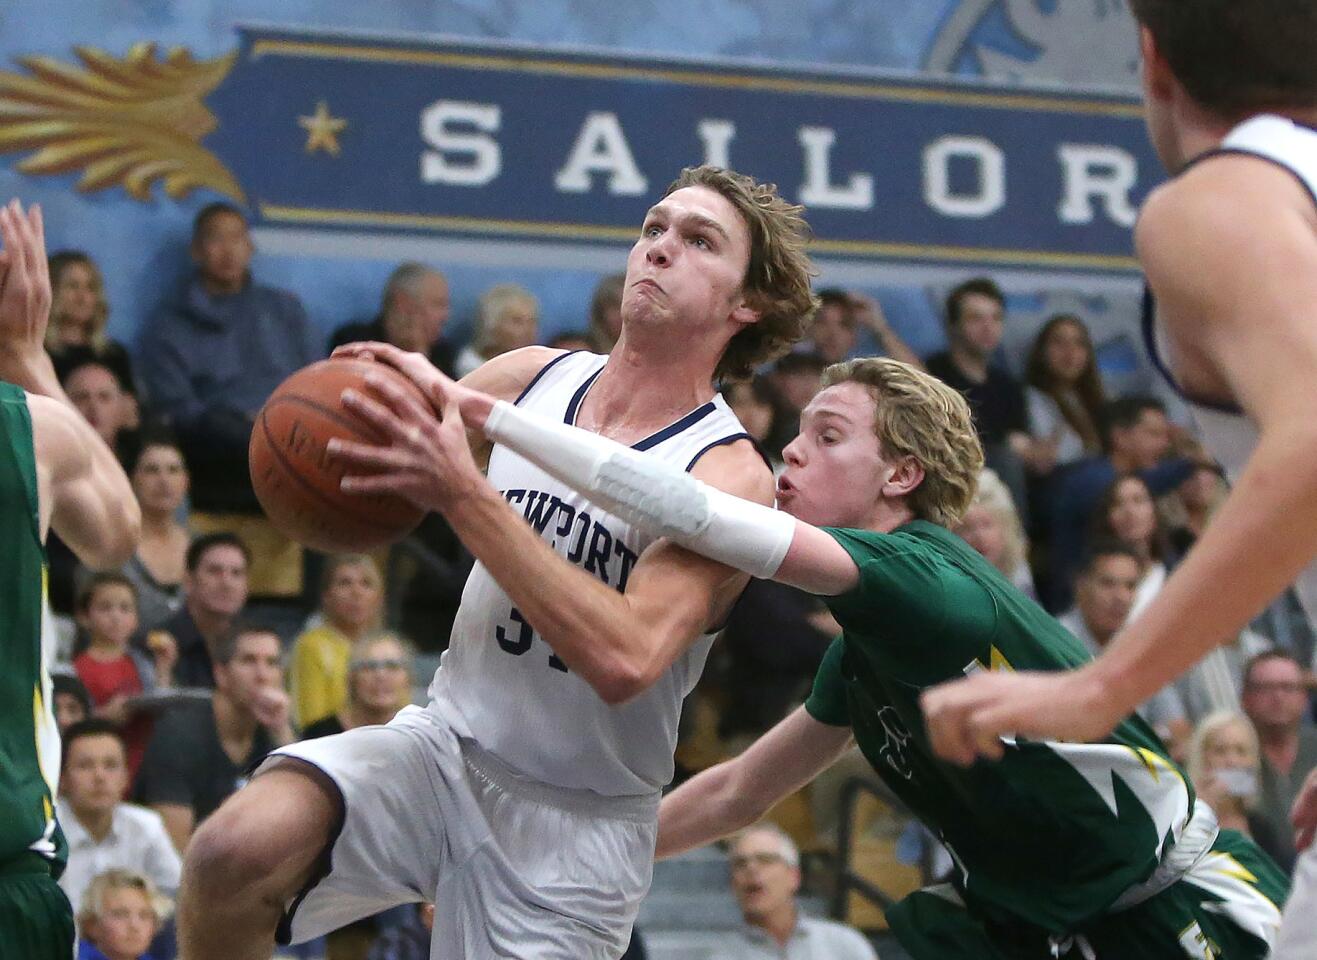 Newport Harbor's Dayne Chalmers drives the basket for a lay-up as Edison's Justin Strauss tries to stop him in Surf League boys' basketball game on Friday.